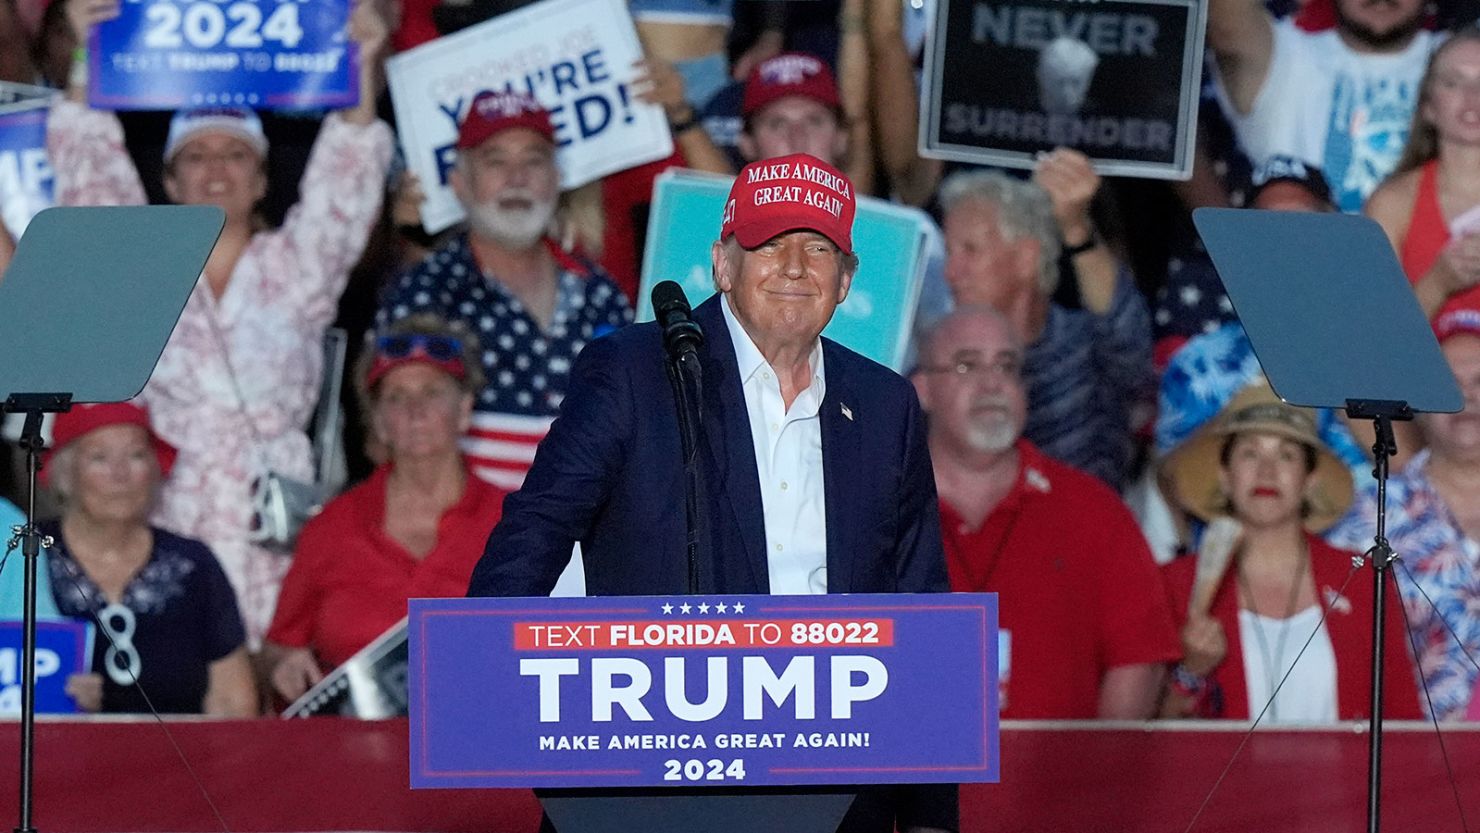 Former President Donald Trump smiles during a campaign rally at Trump National Doral Miami on July 9, 2024, in Florida.